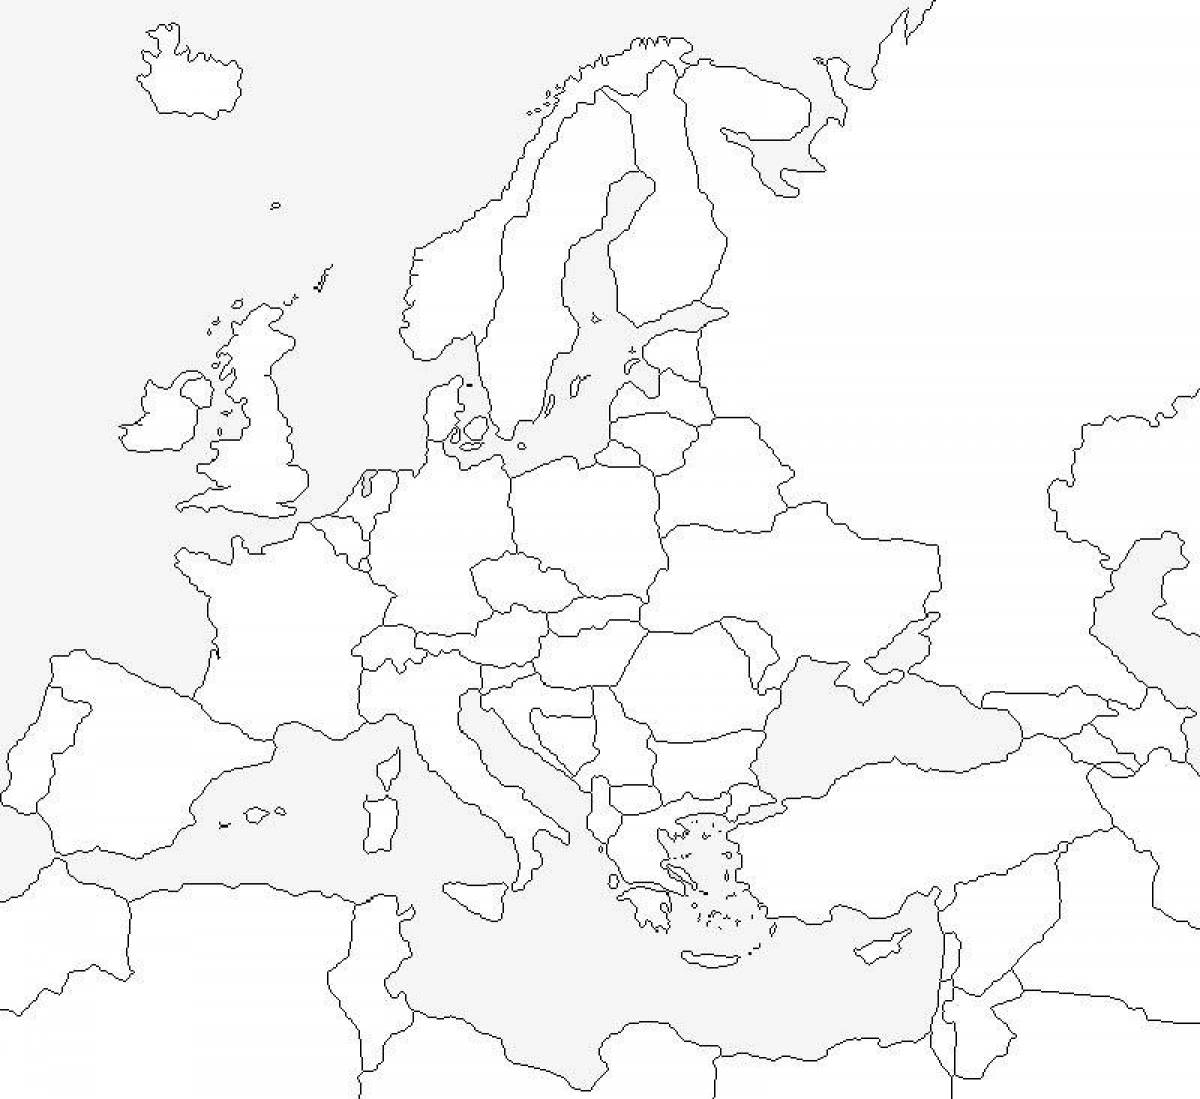 Glossy map of europe